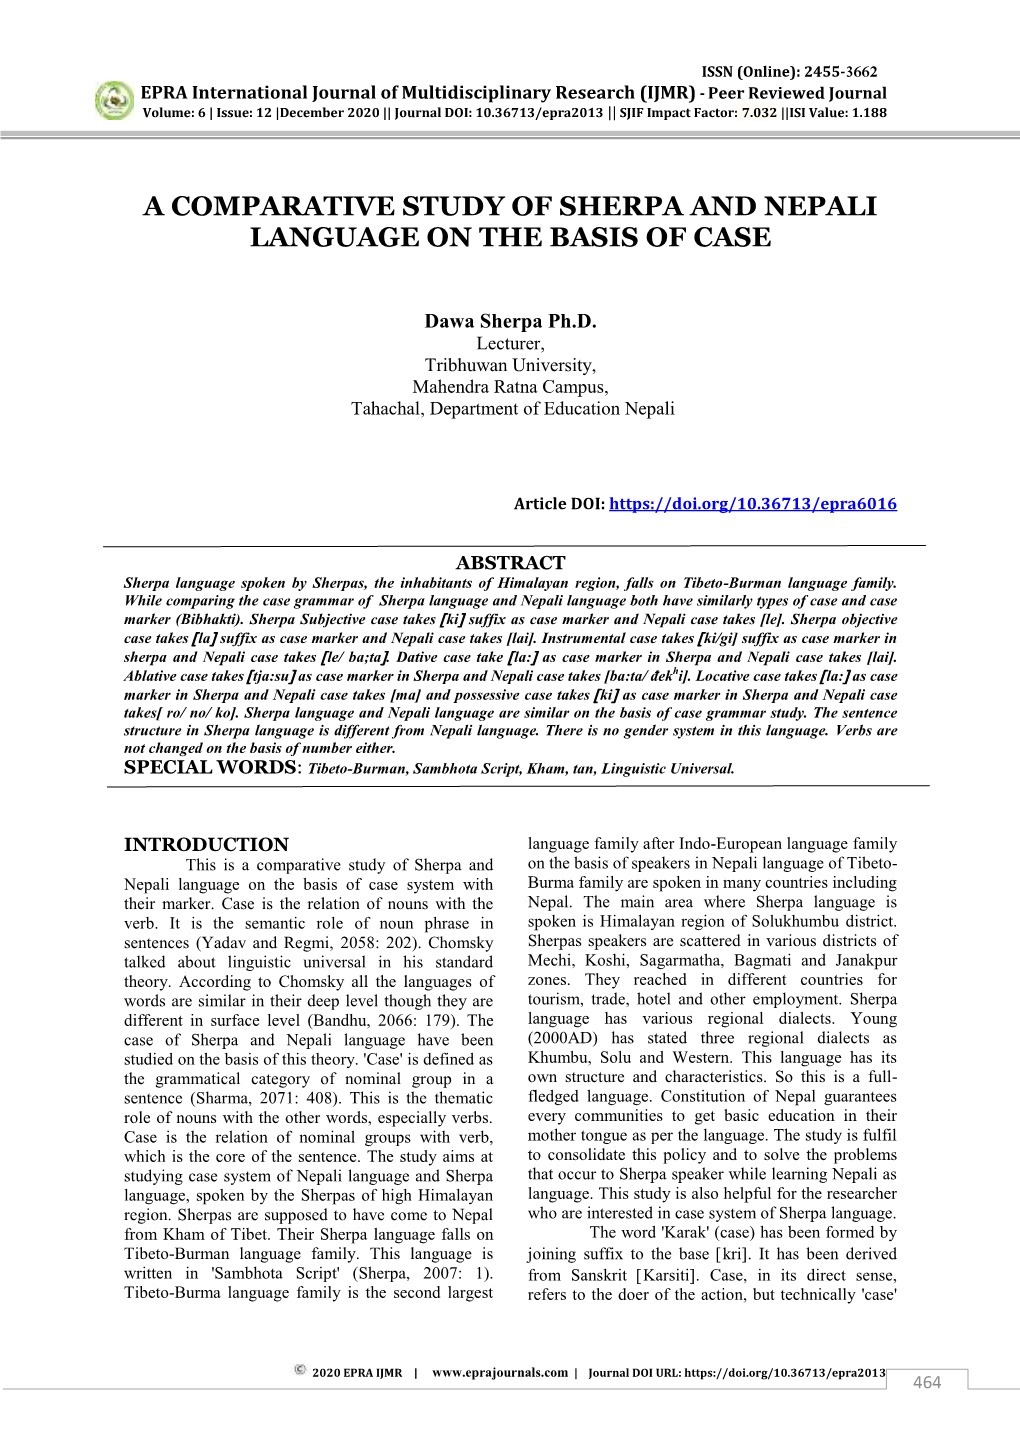 A Comparative Study of Sherpa and Nepali Language on the Basis of Case